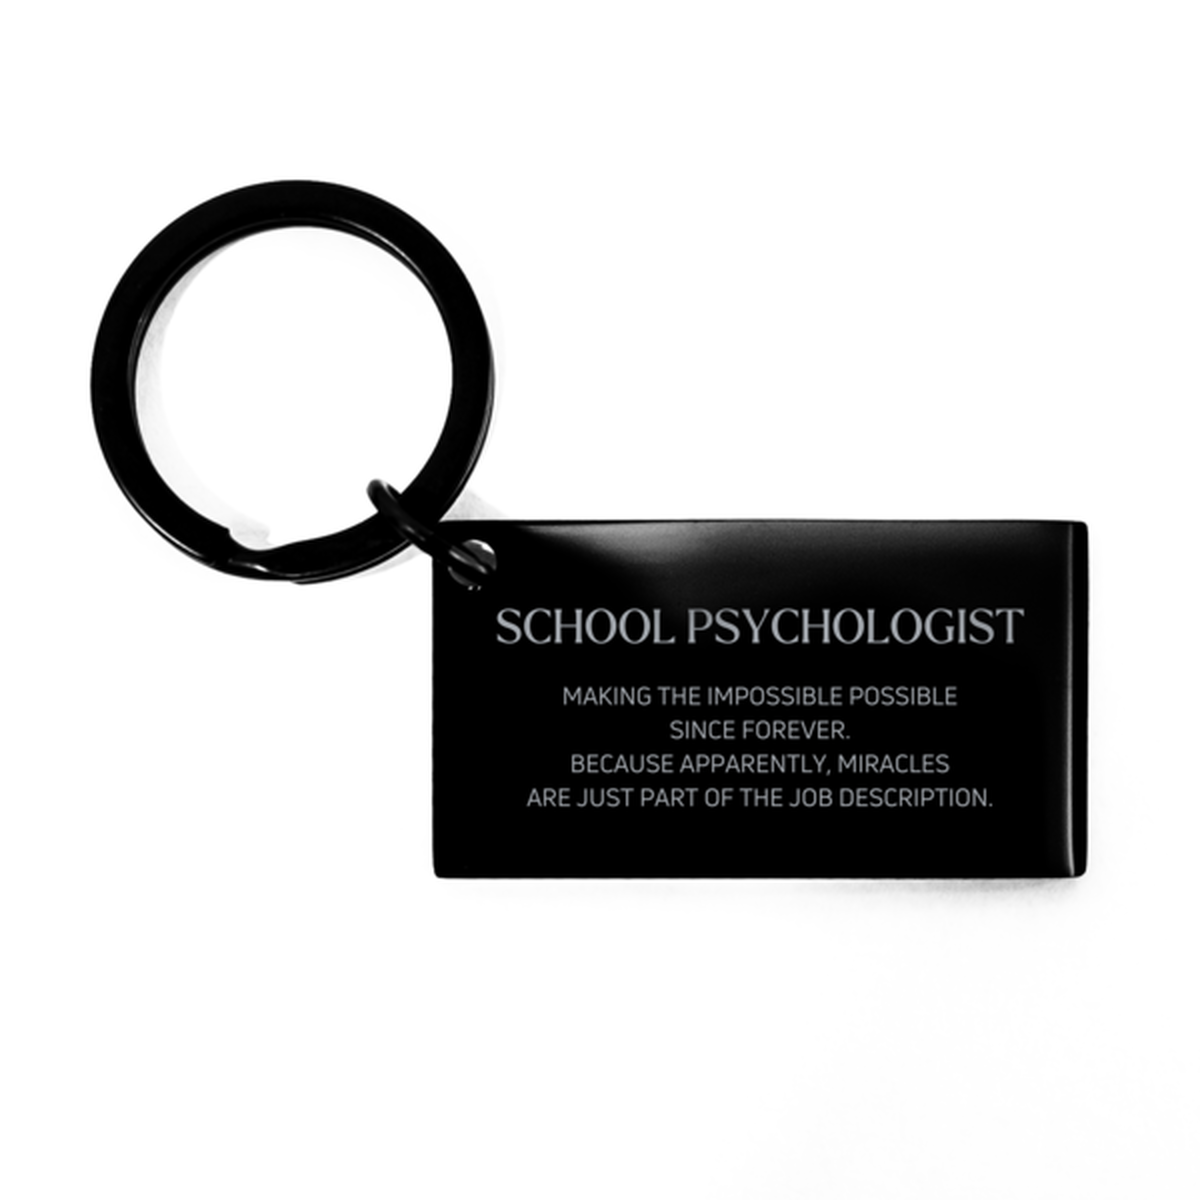 Funny School Psychologist Gifts, Miracles are just part of the job description, Inspirational Birthday Keychain For School Psychologist, Men, Women, Coworkers, Friends, Boss